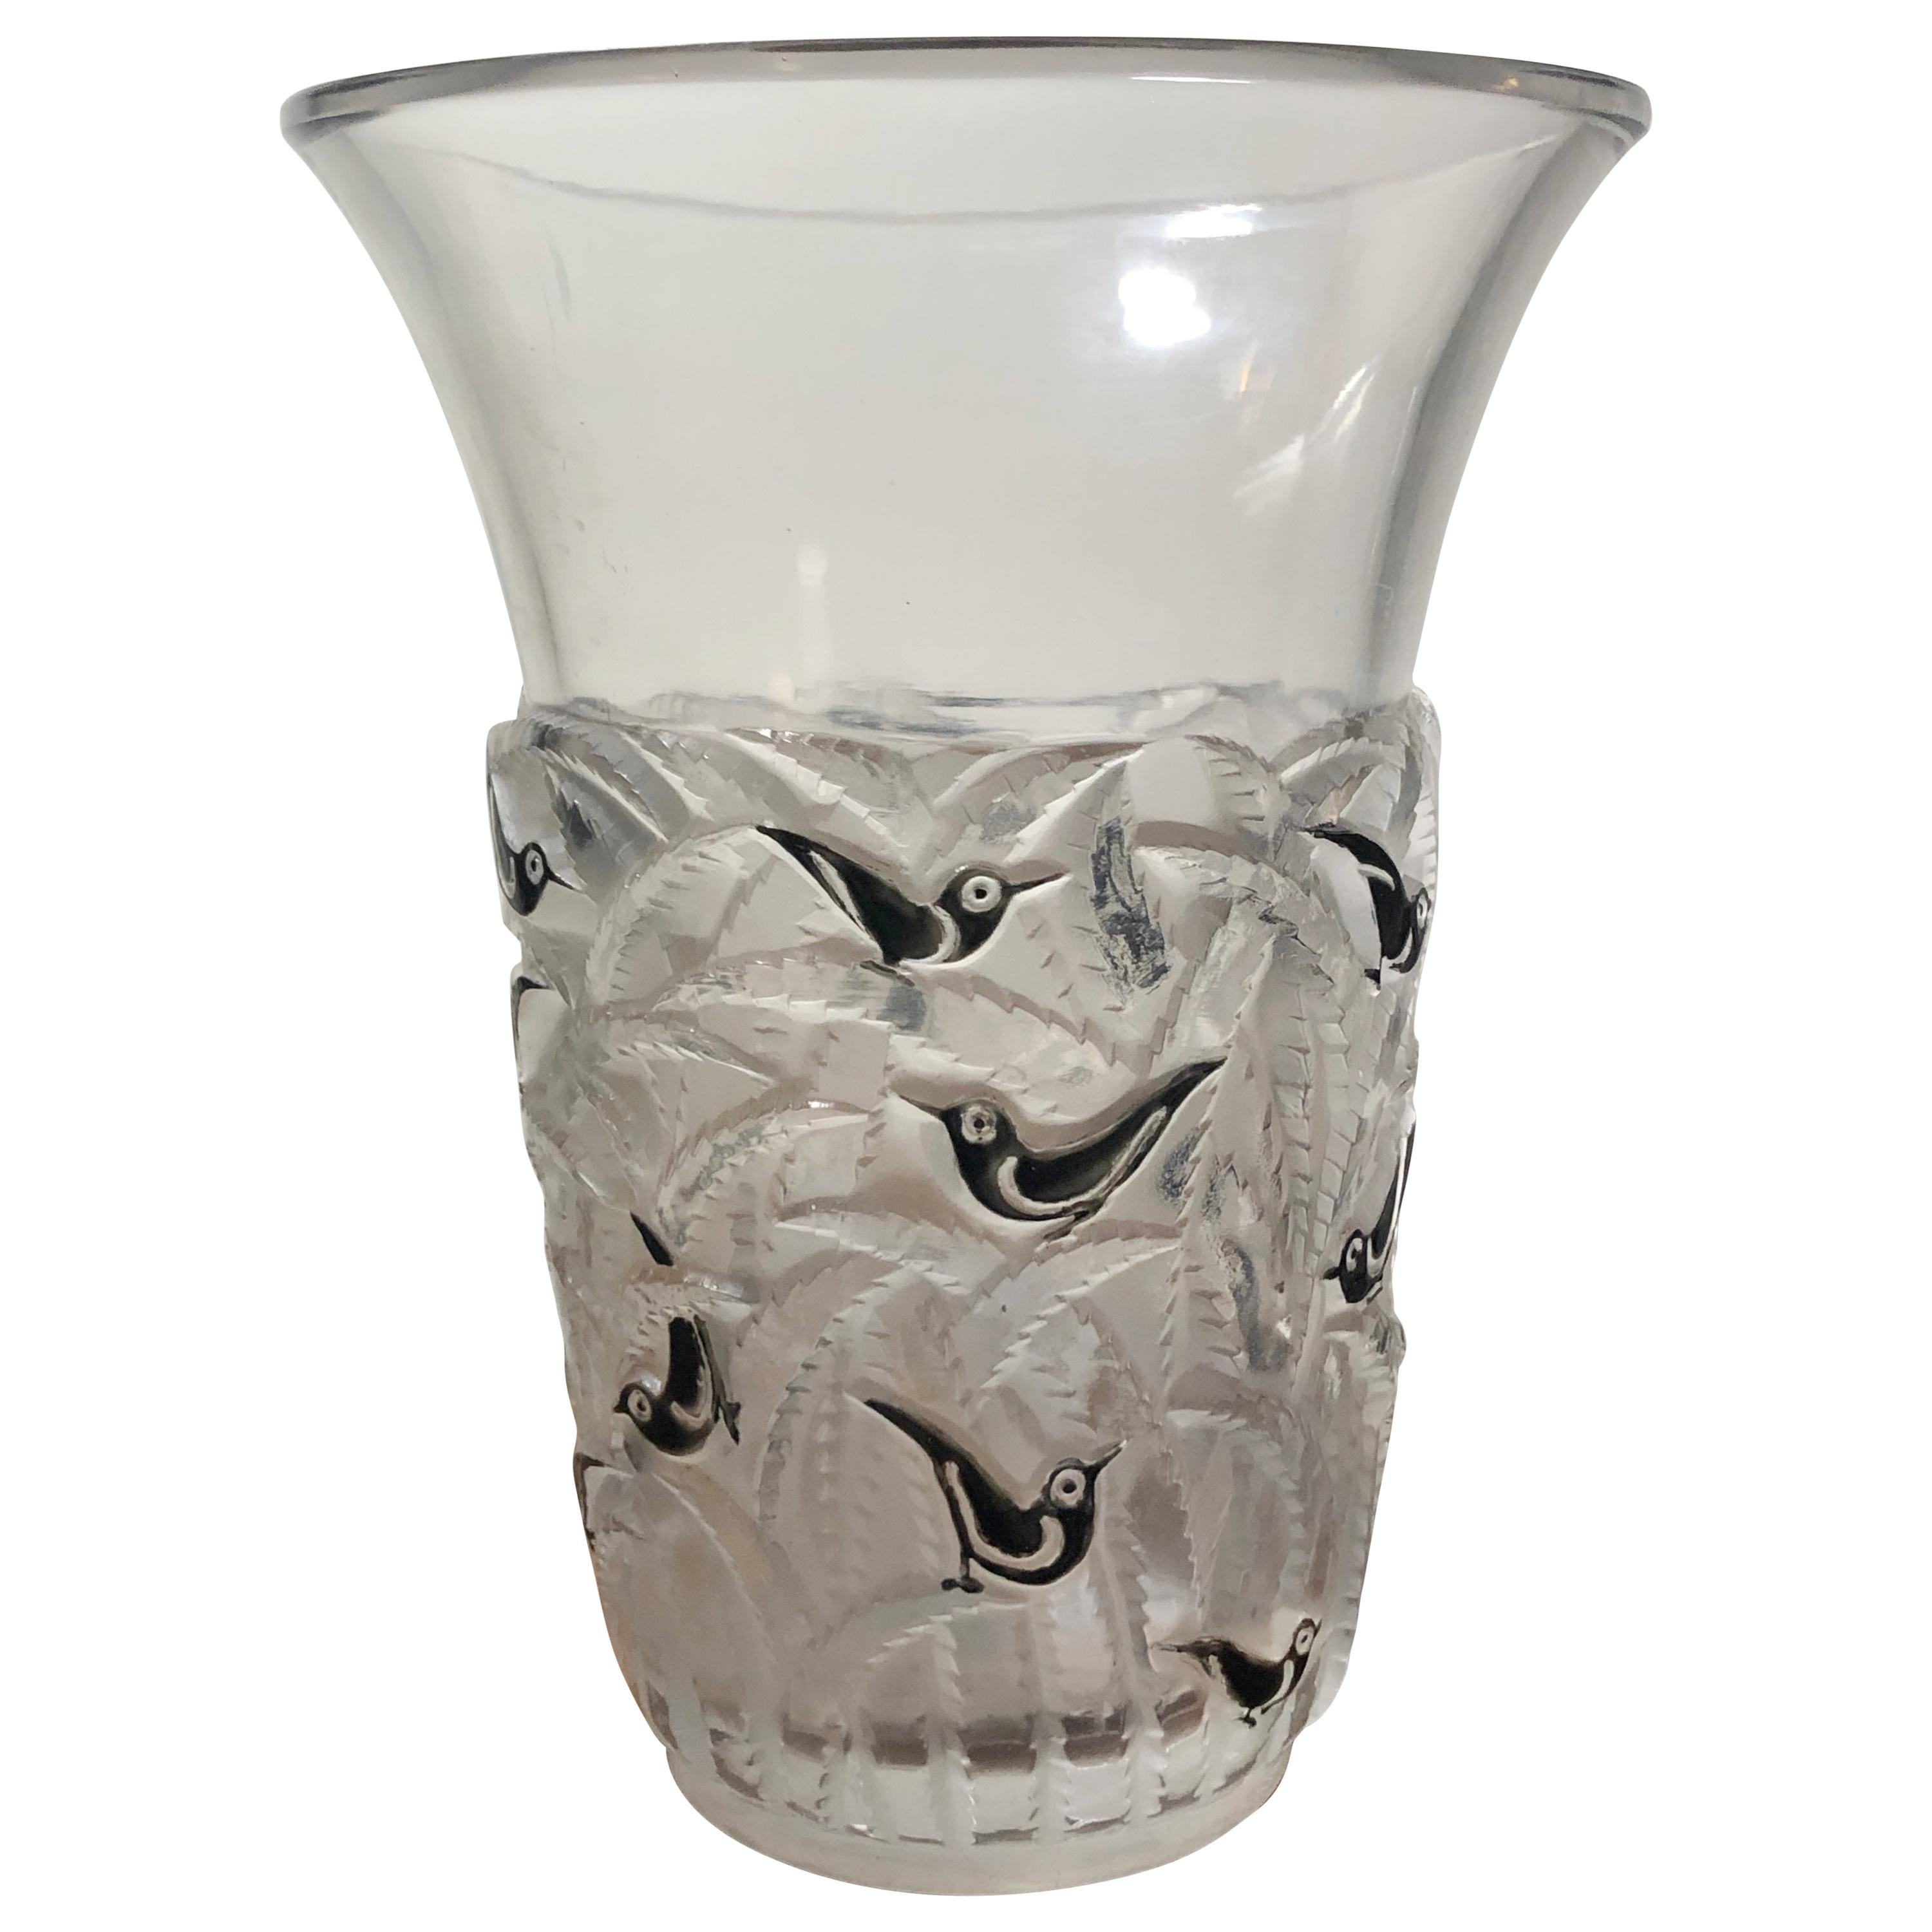 1930 Rene Lalique Borneo Vase in Frosted Glass with Shinny Original Black Enamel